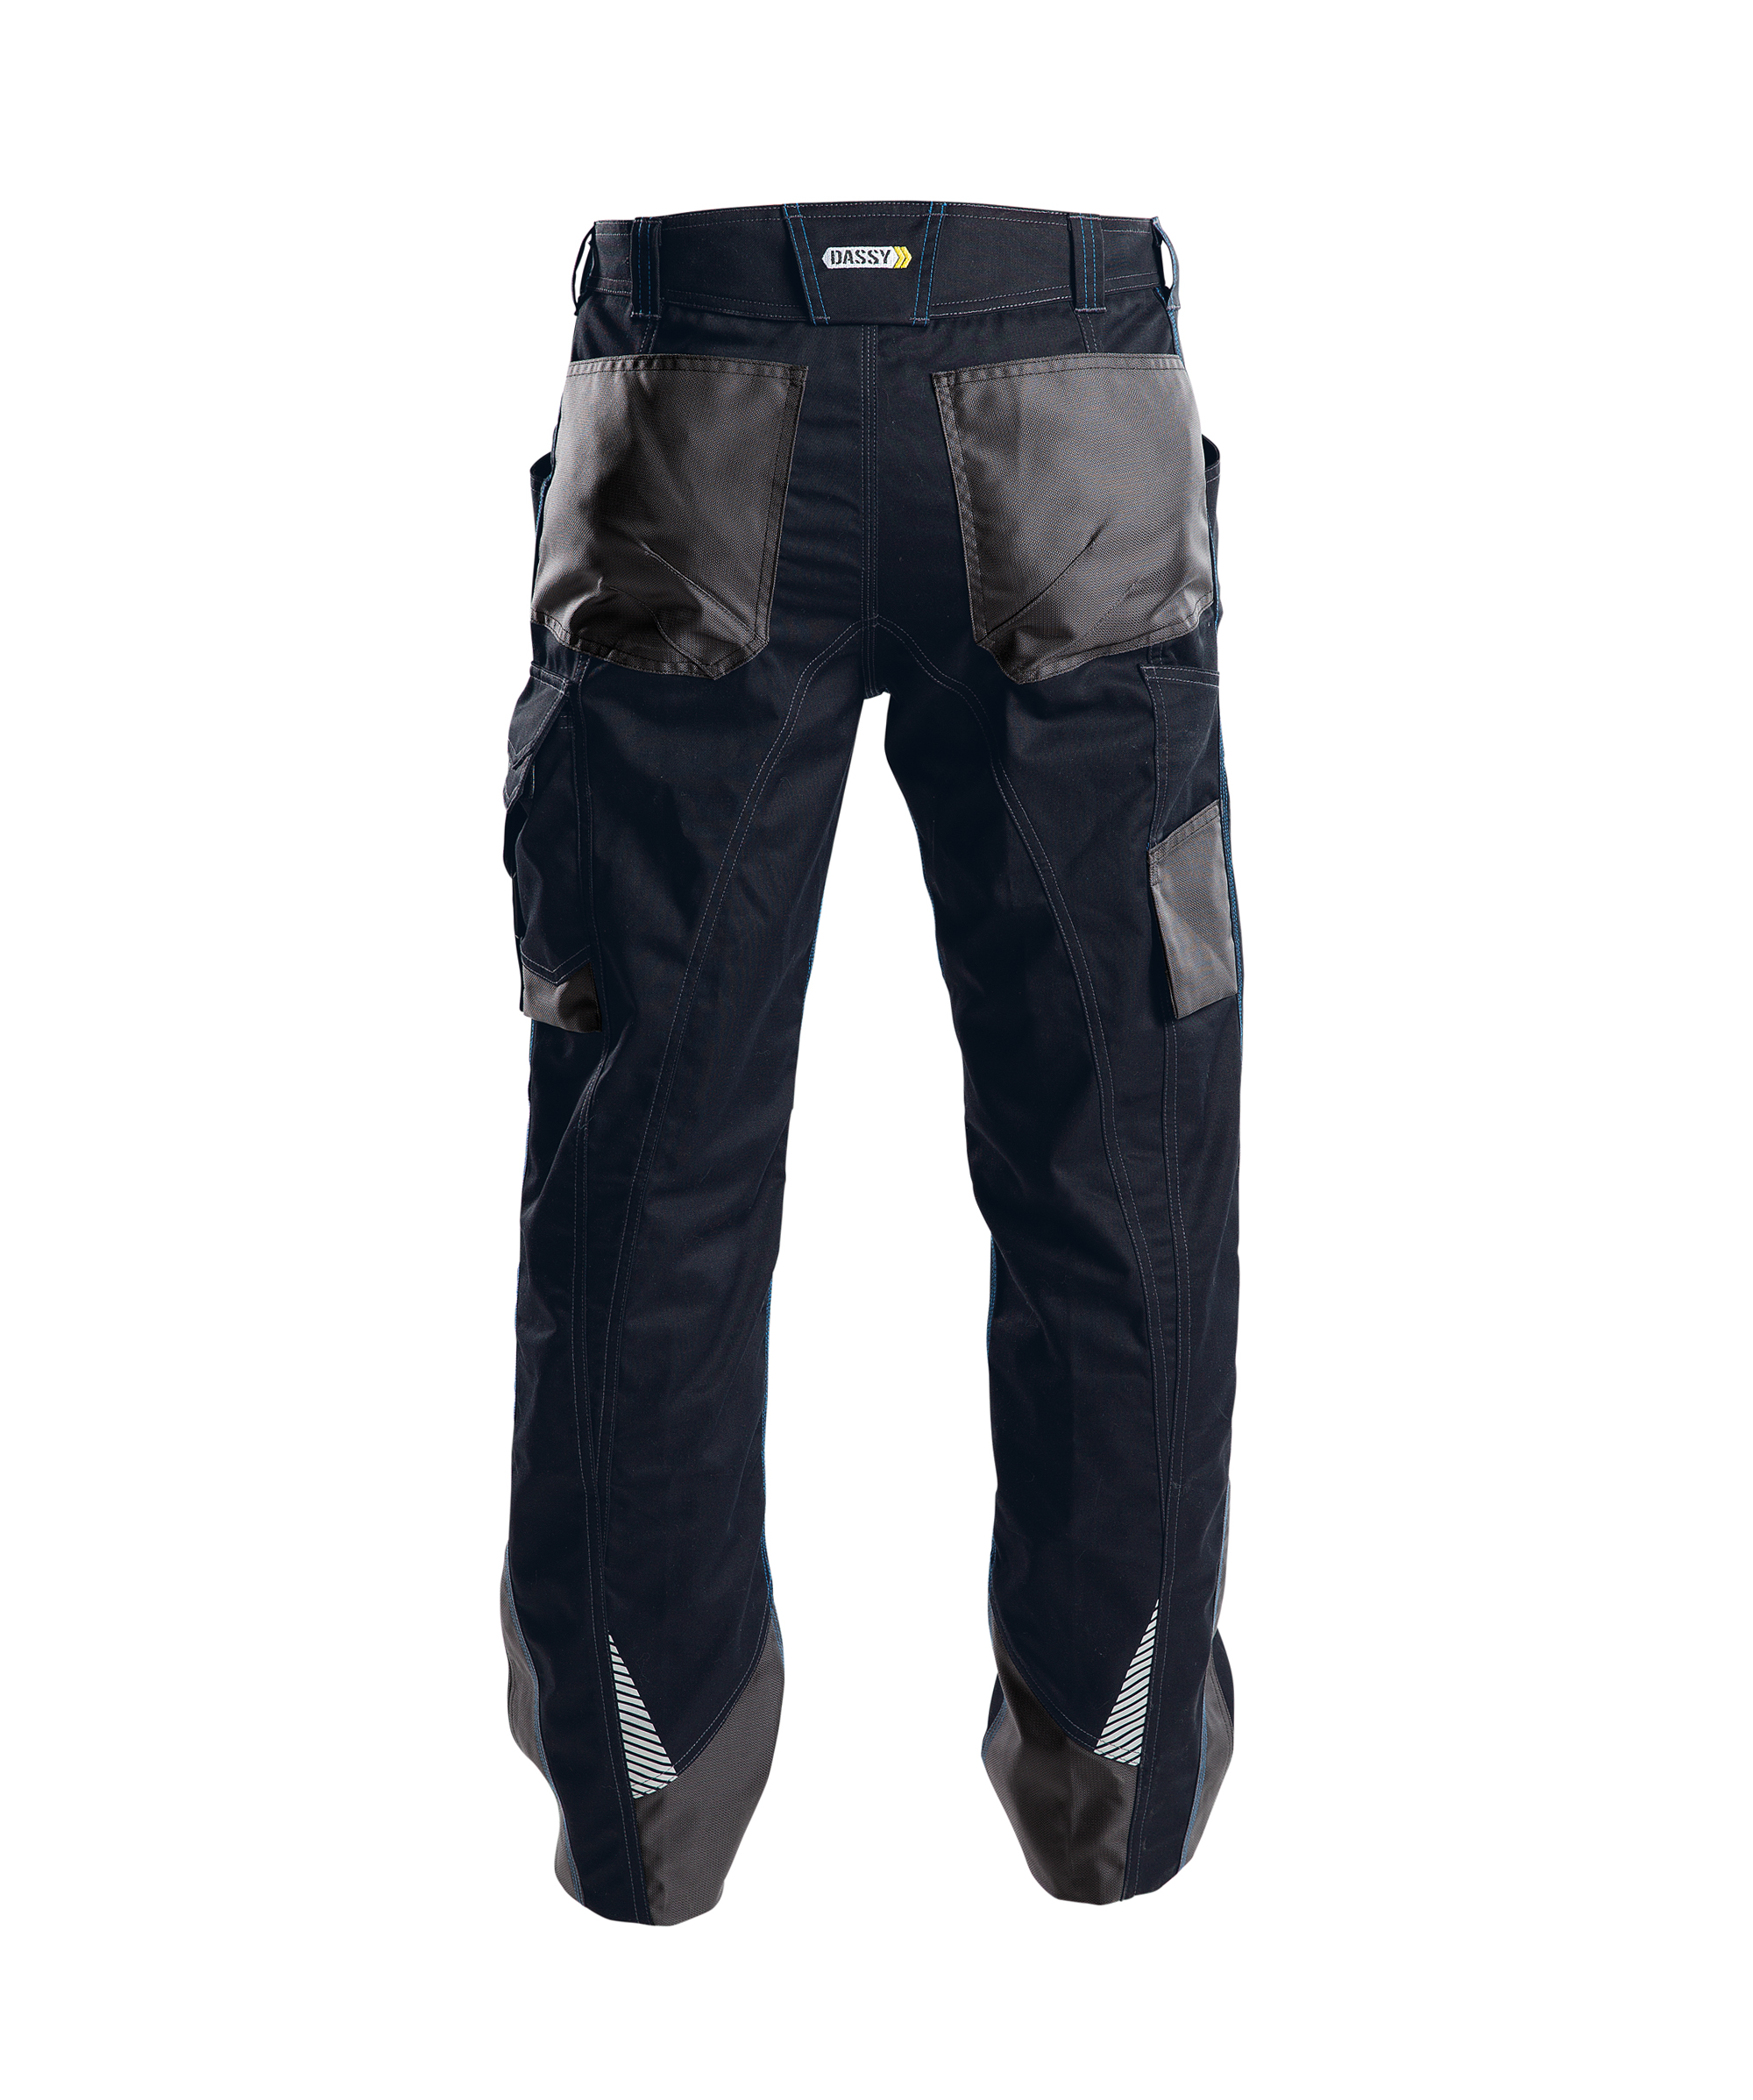 spectrum_two-tone-work-trousers_midnight-blue-anthracite-grey_back.jpg